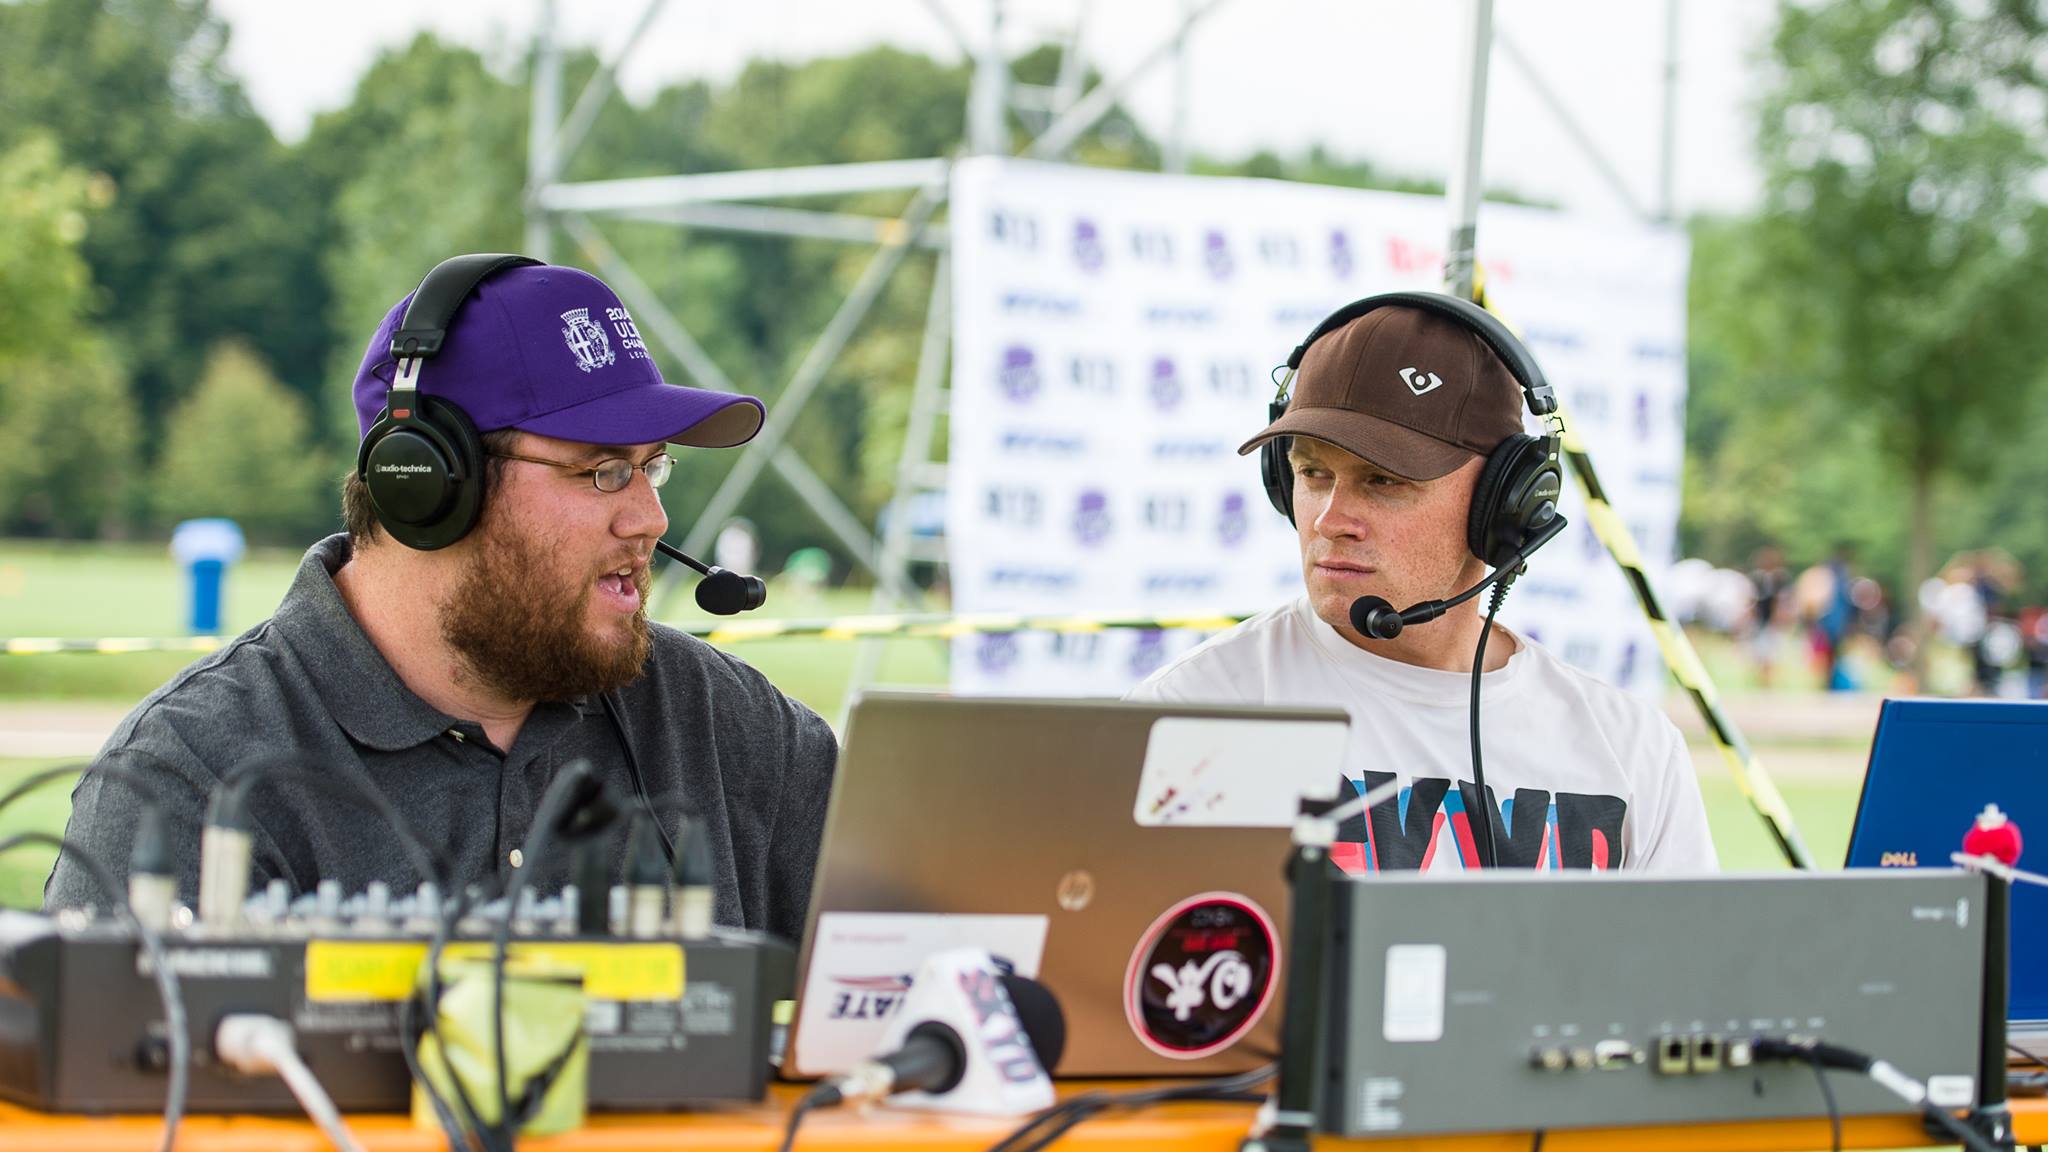 Bryan Jones and Liam Rosen commentate at WJUC in Lecco. (Photo by Kevin Leclaire - UltiPhotos.com)